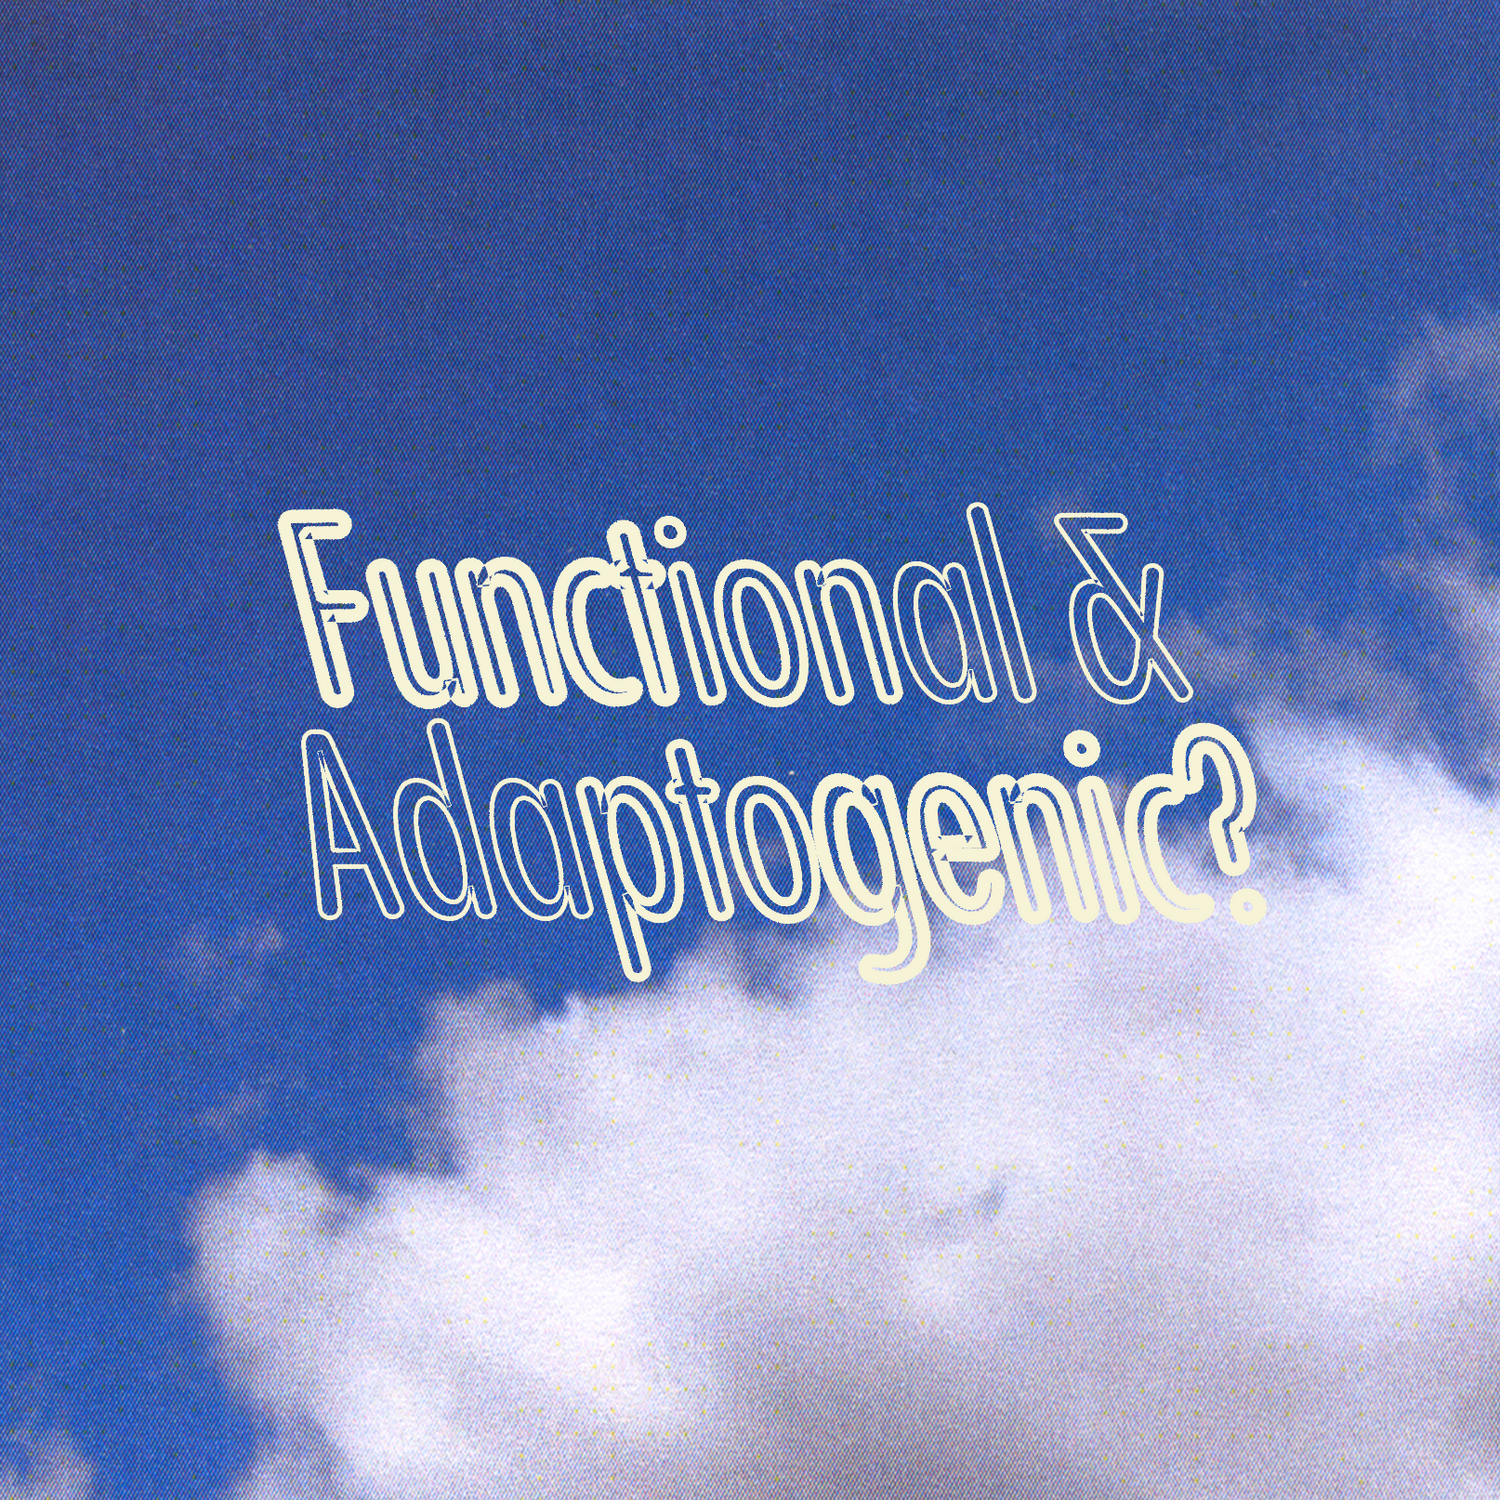 Text "Functional & Adaptogenic?" in white with a neon outline against a blue sky with clouds.